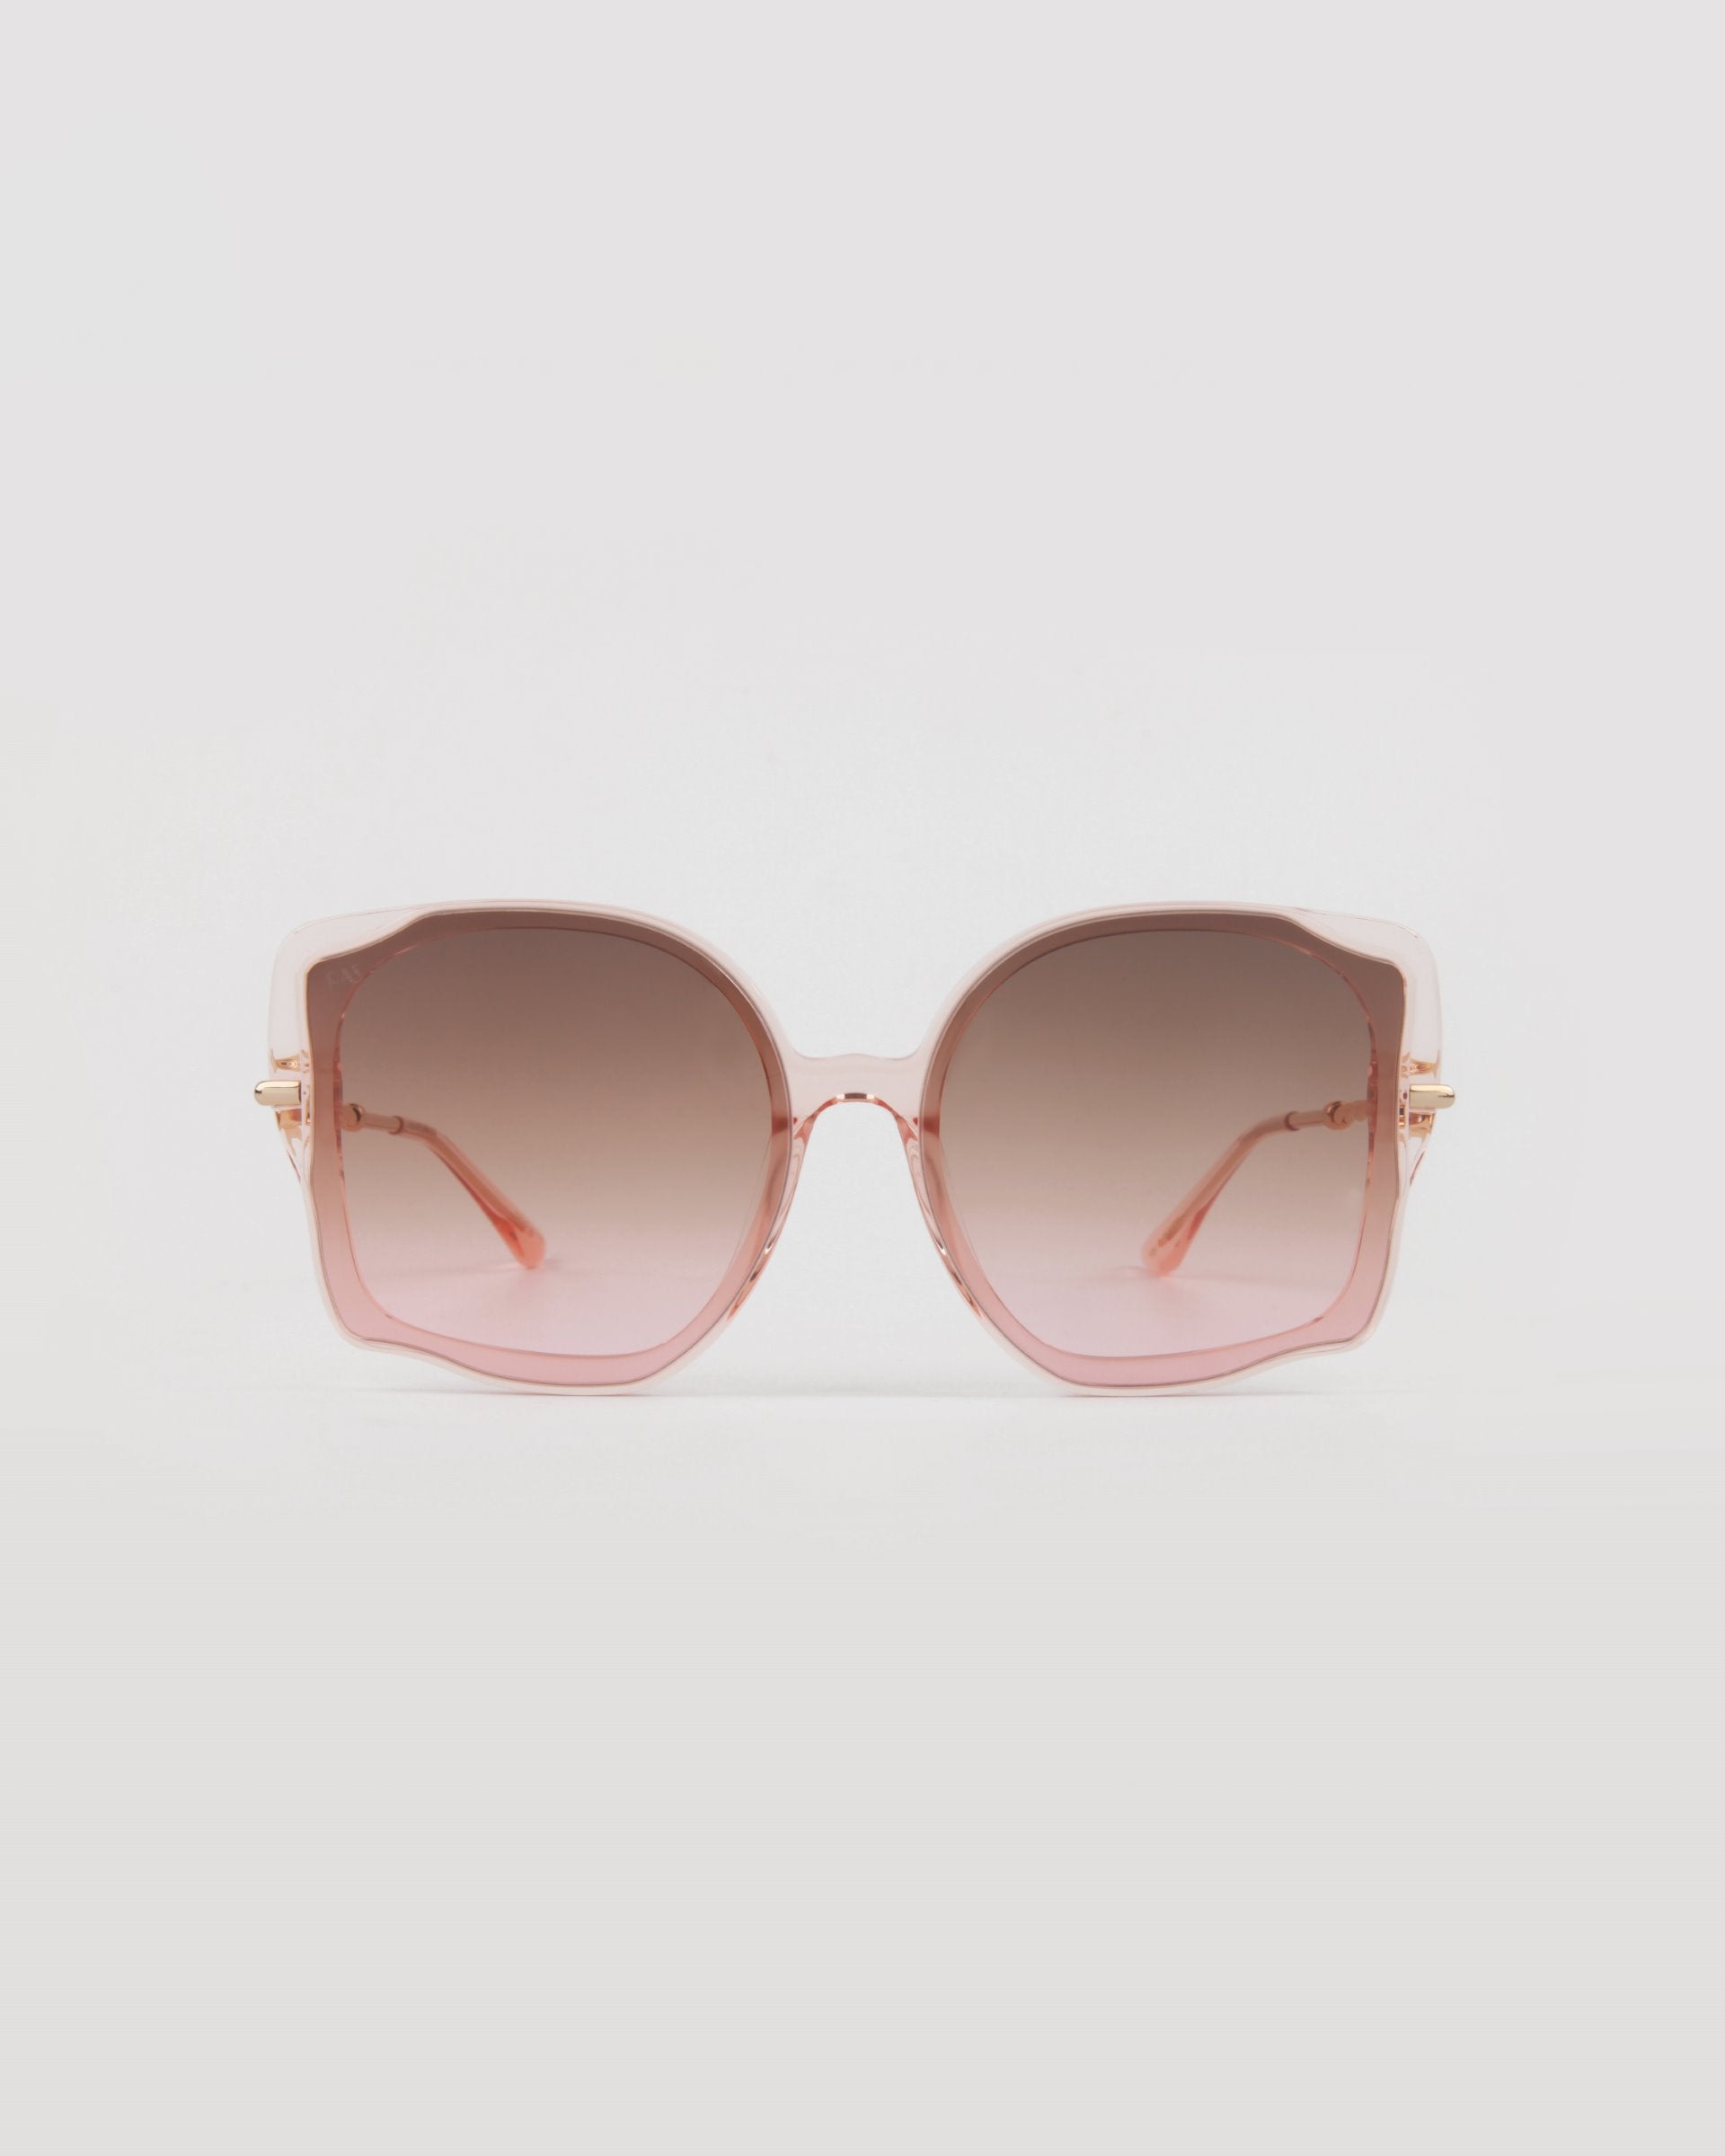 A pair of stylish, oversized frame sunglasses with pale pink handmade acetate frames and gradient lenses, transitioning from darker at the top to lighter at the bottom, set against a plain white background. These are the Fahrenheit by For Art's Sake®.